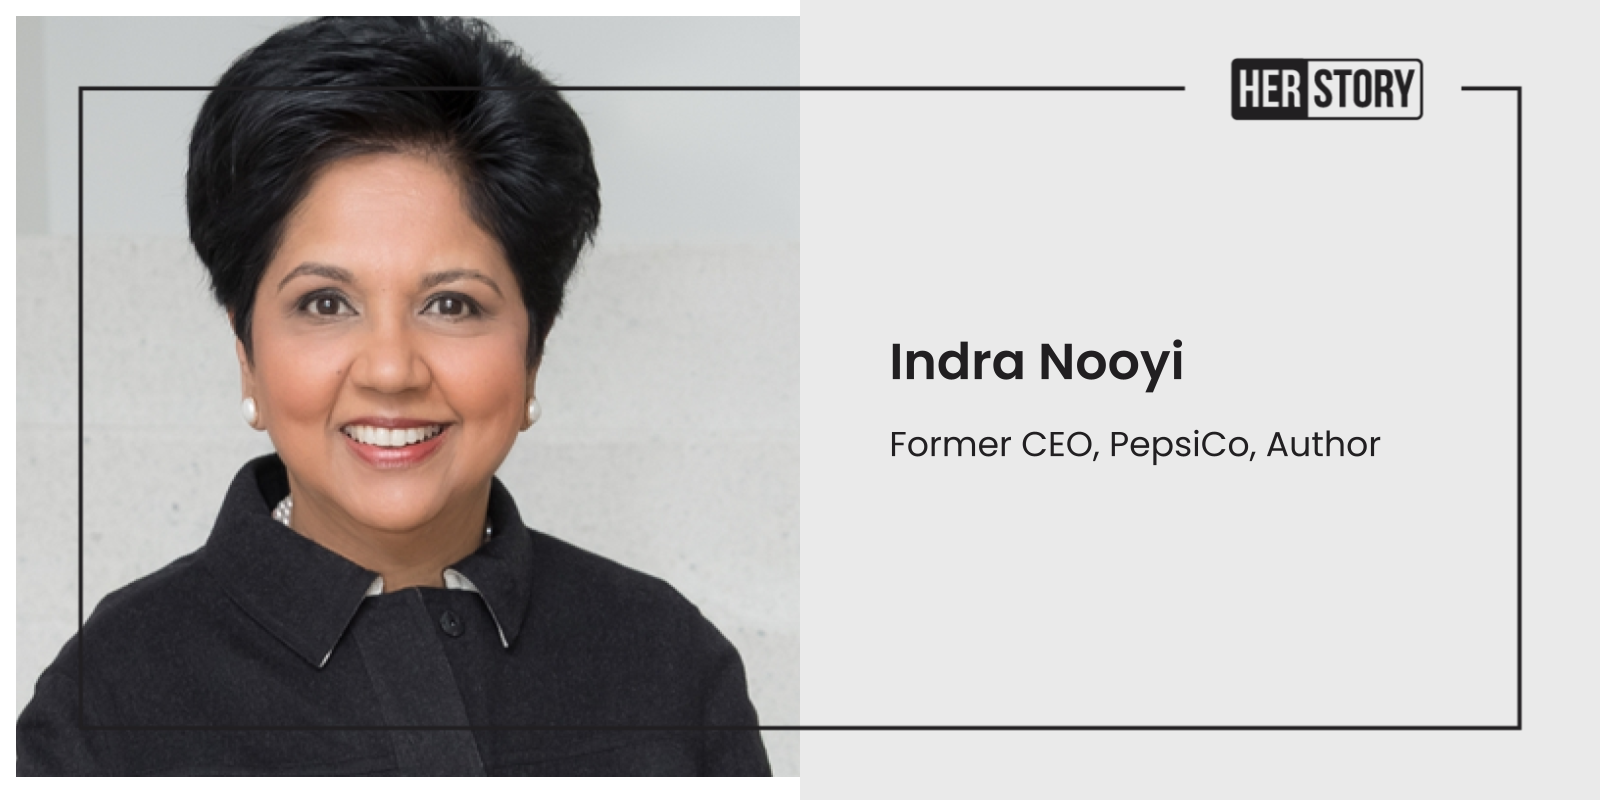 Gender bias, organisational support, leaving the crown in the garage: Indra Nooyi’s take on her life and work
